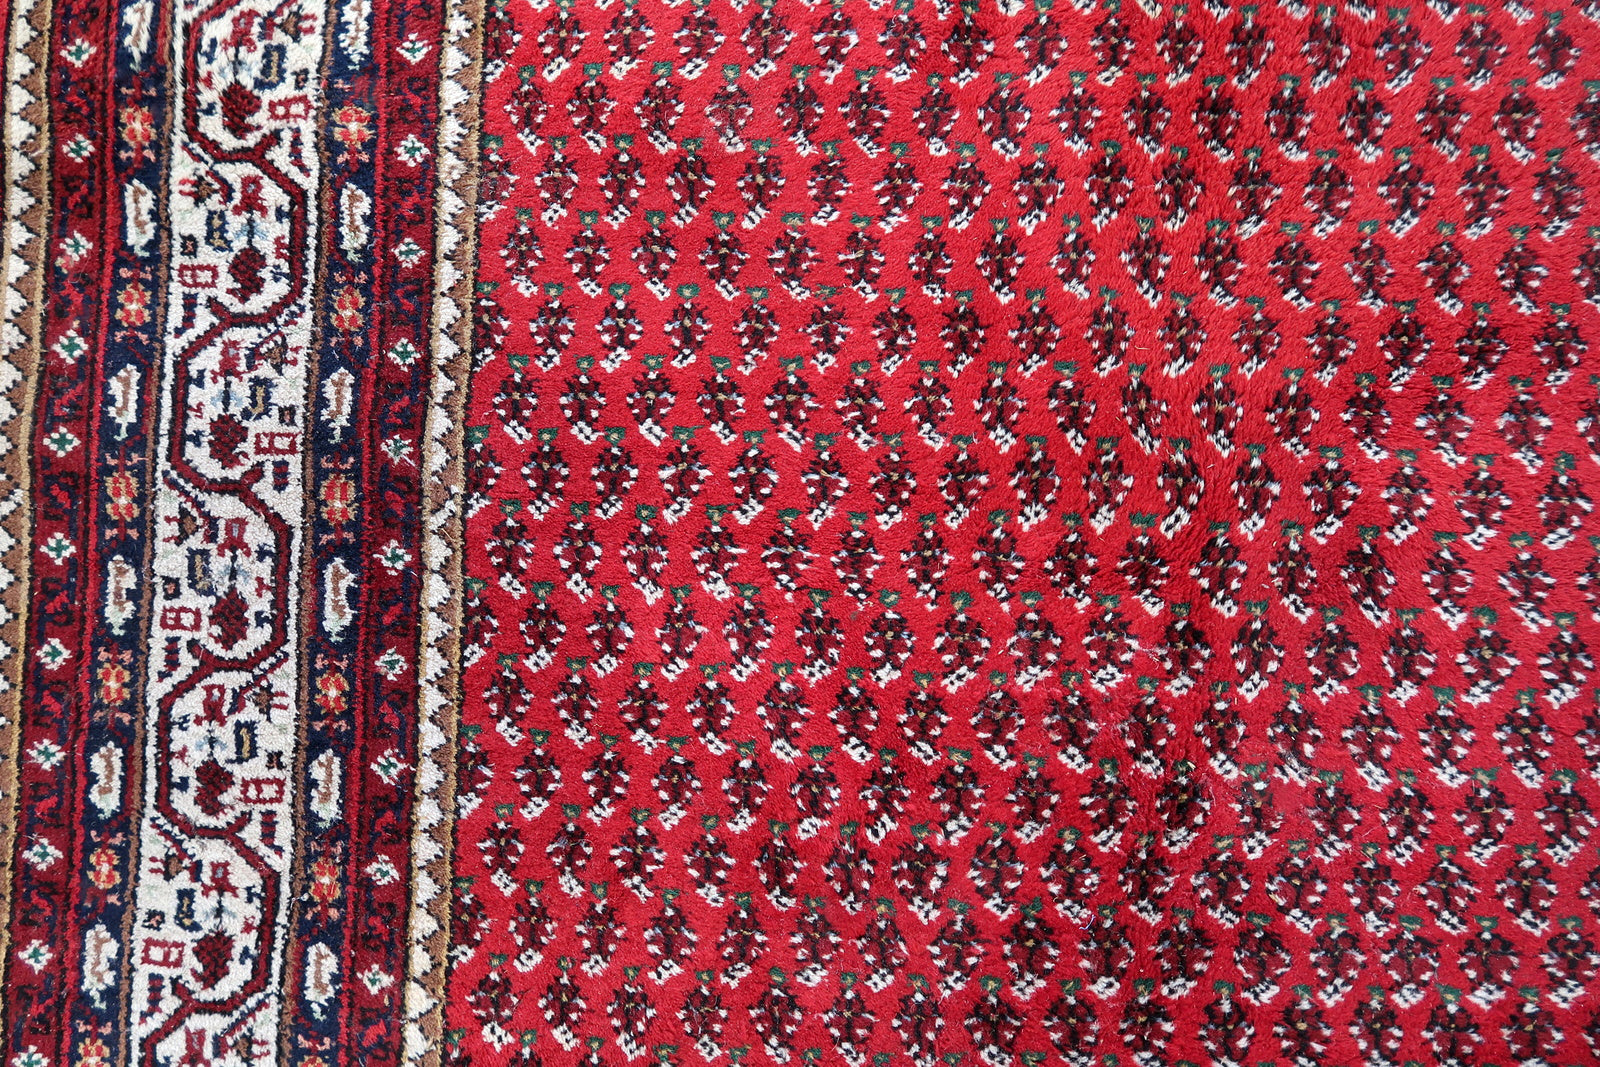 Handmade vintage Indian Seraband rug in original condition, it has some age wear on the one end. The rug has been made in traditional pattern, it is from end of 20th century. The shades of the rug are mostly in red and white. All-over design will bring some modern look to your space. All dyes on this rug are natural. This is the type of rug woven in India to compete in the same market as rugs from Persia.